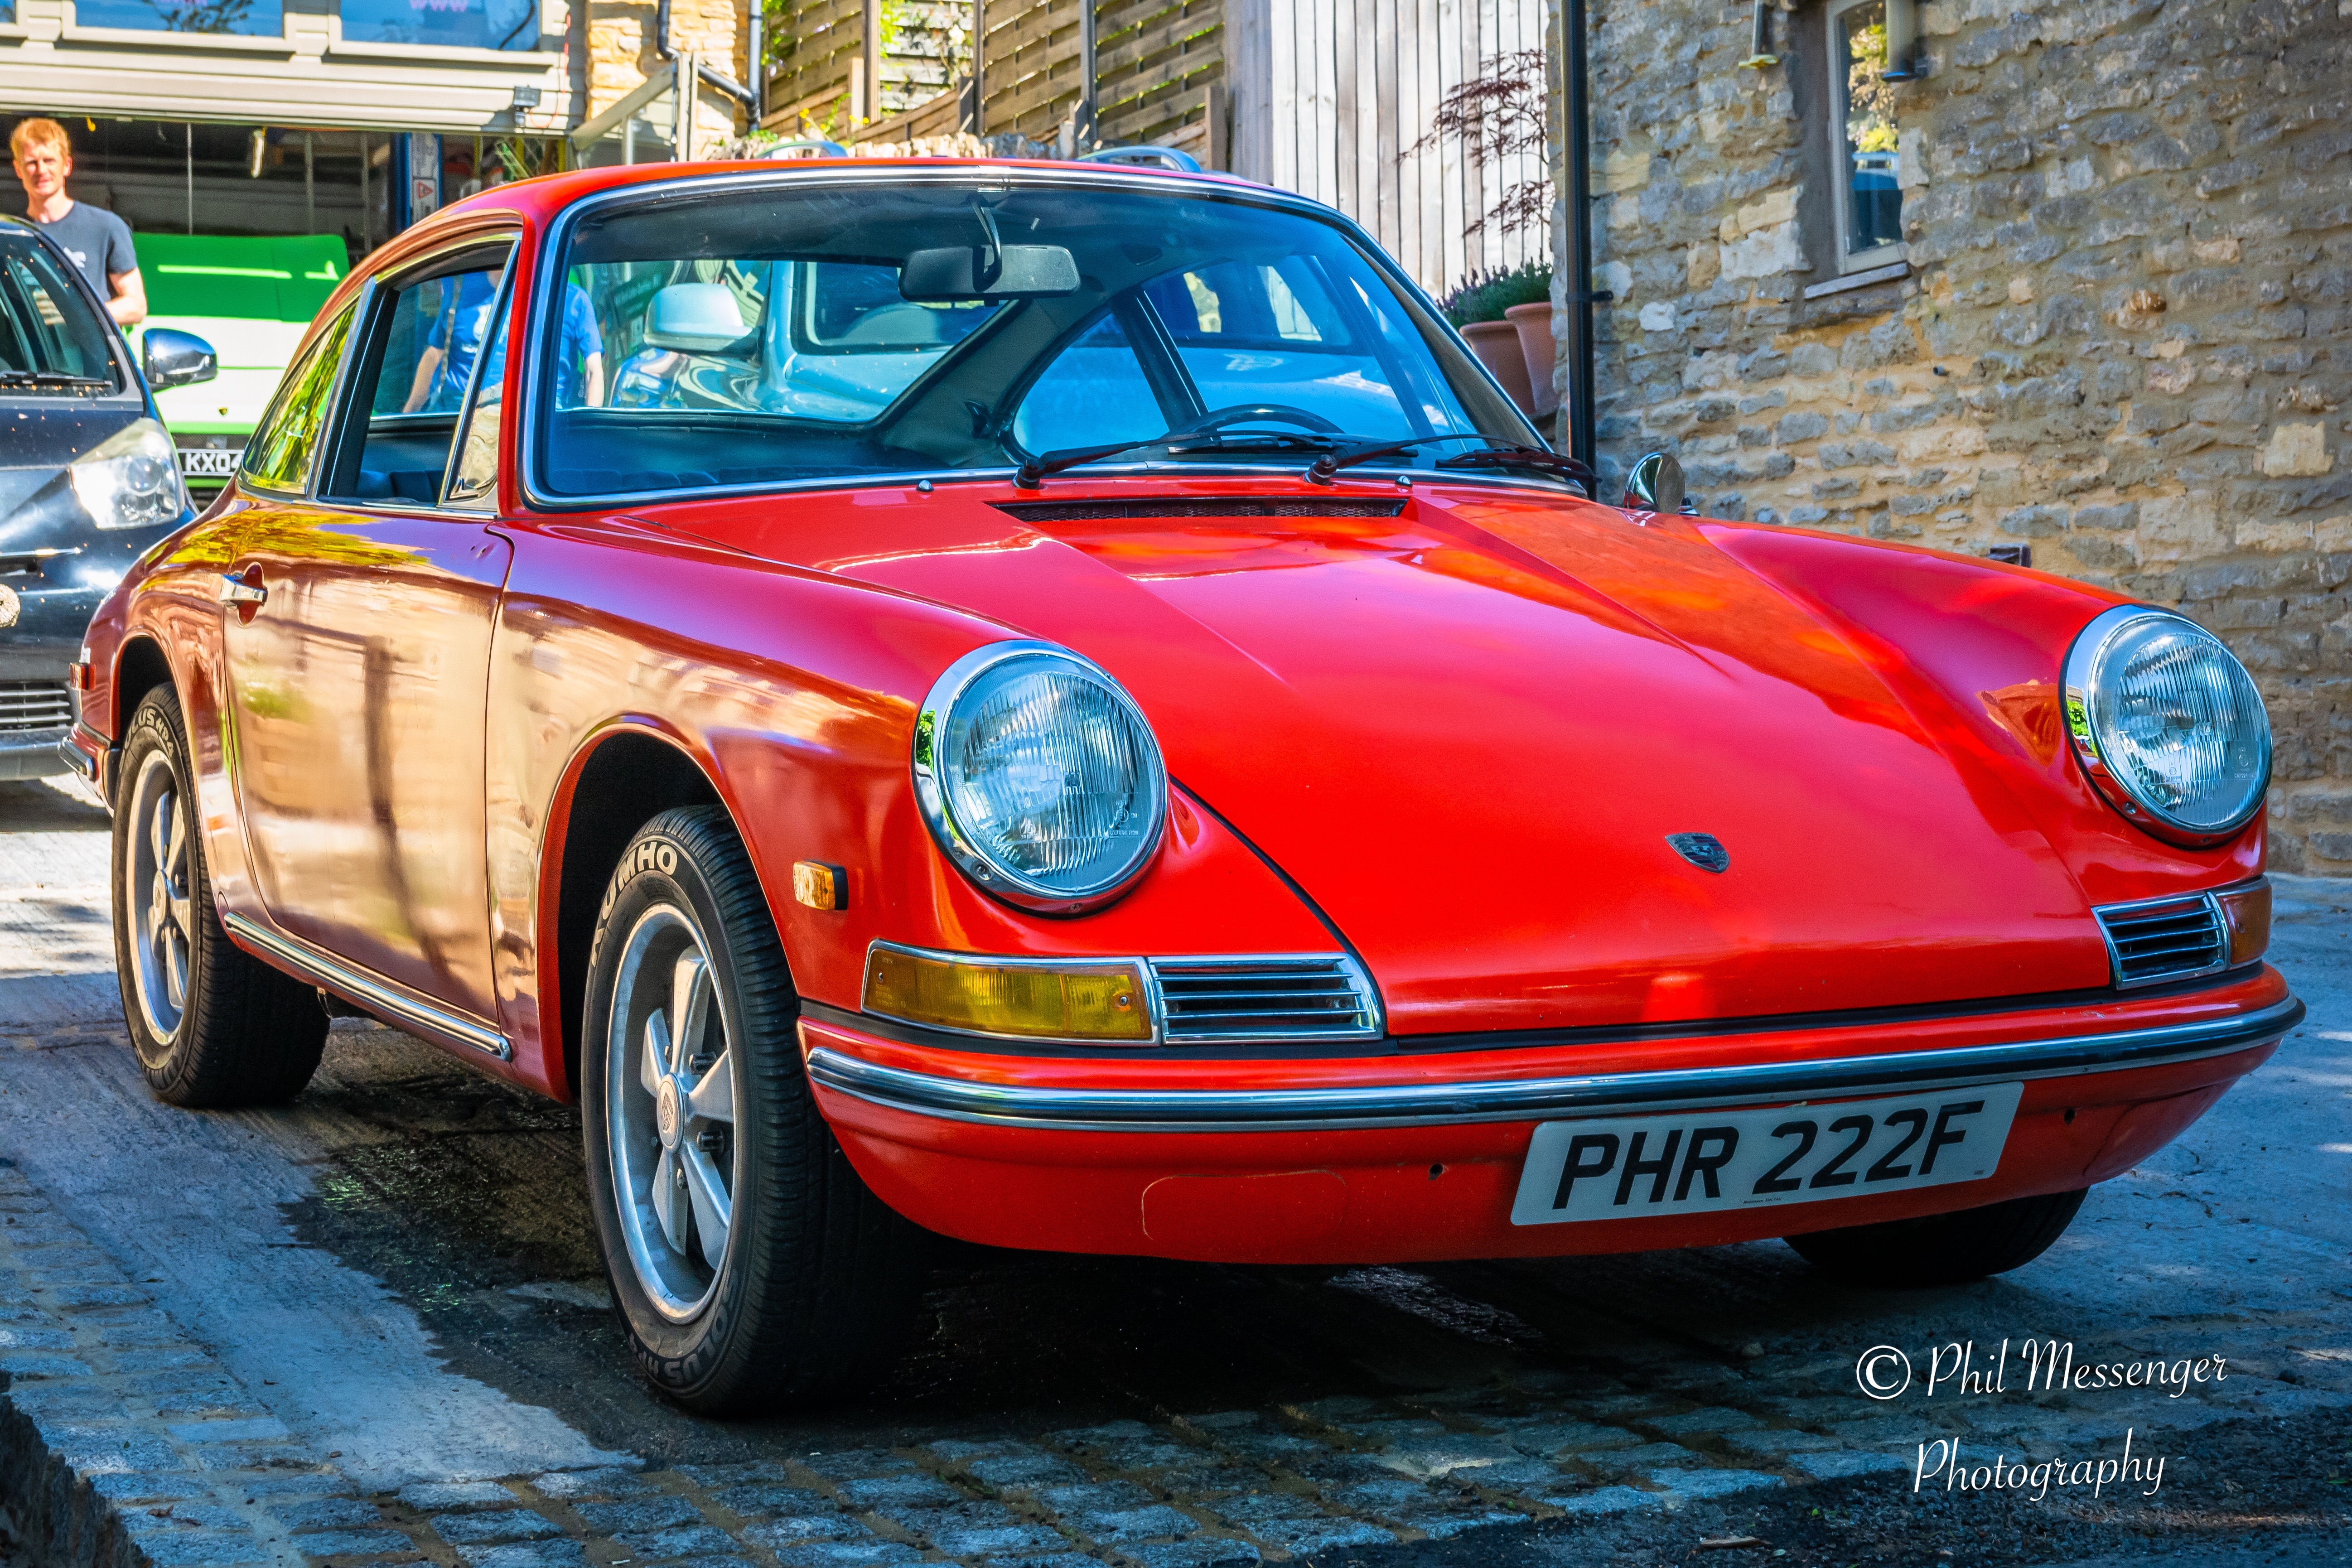 A beautiful 1968 Porsche 912 in the Cotswolds, England.